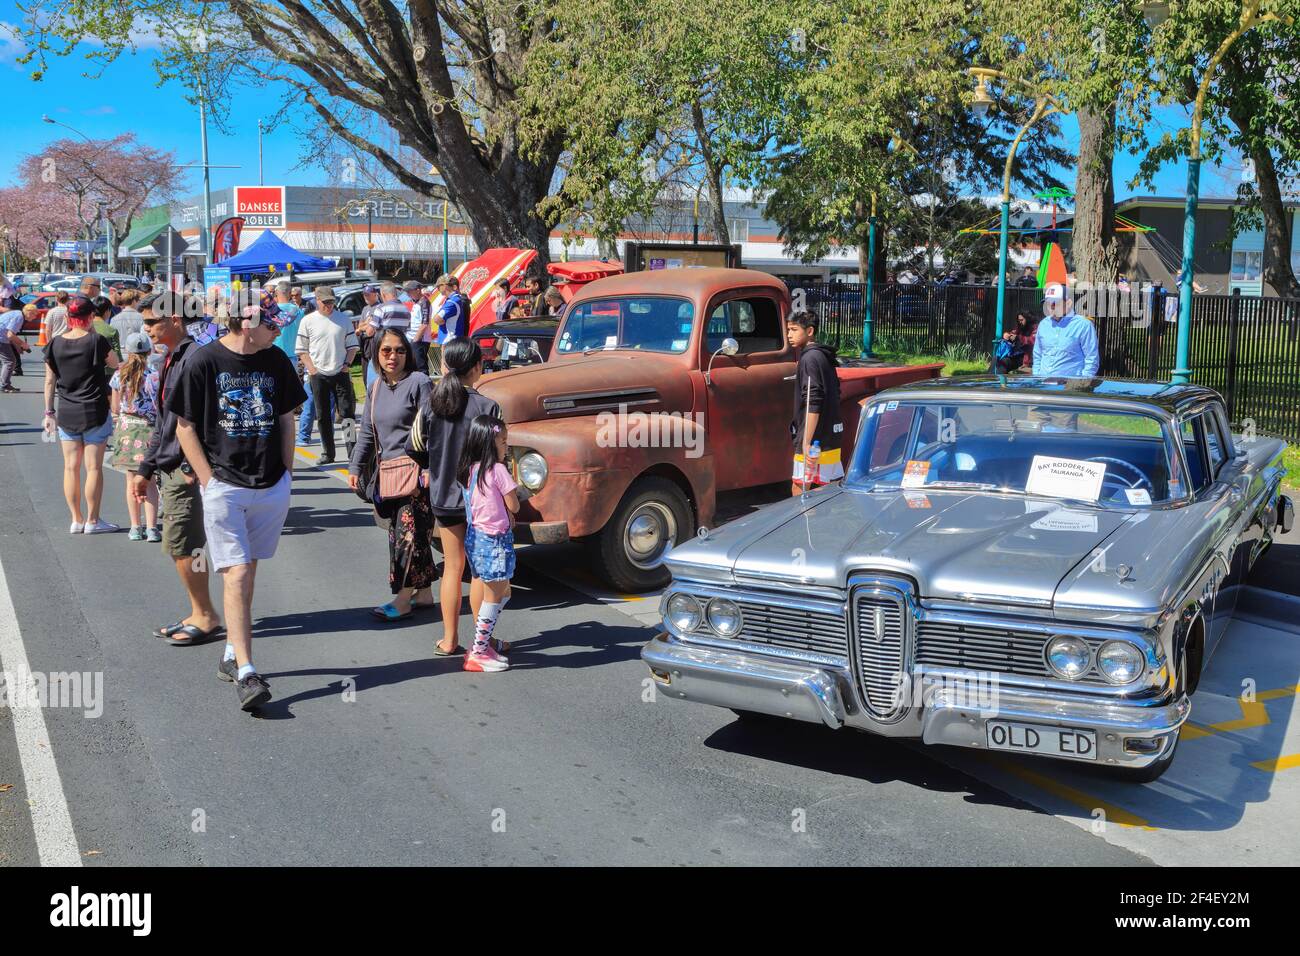 An outdoor classic car show. In the foreground is a silver 1959 Ford Edsel. Tauranga, New Zealand Stock Photo